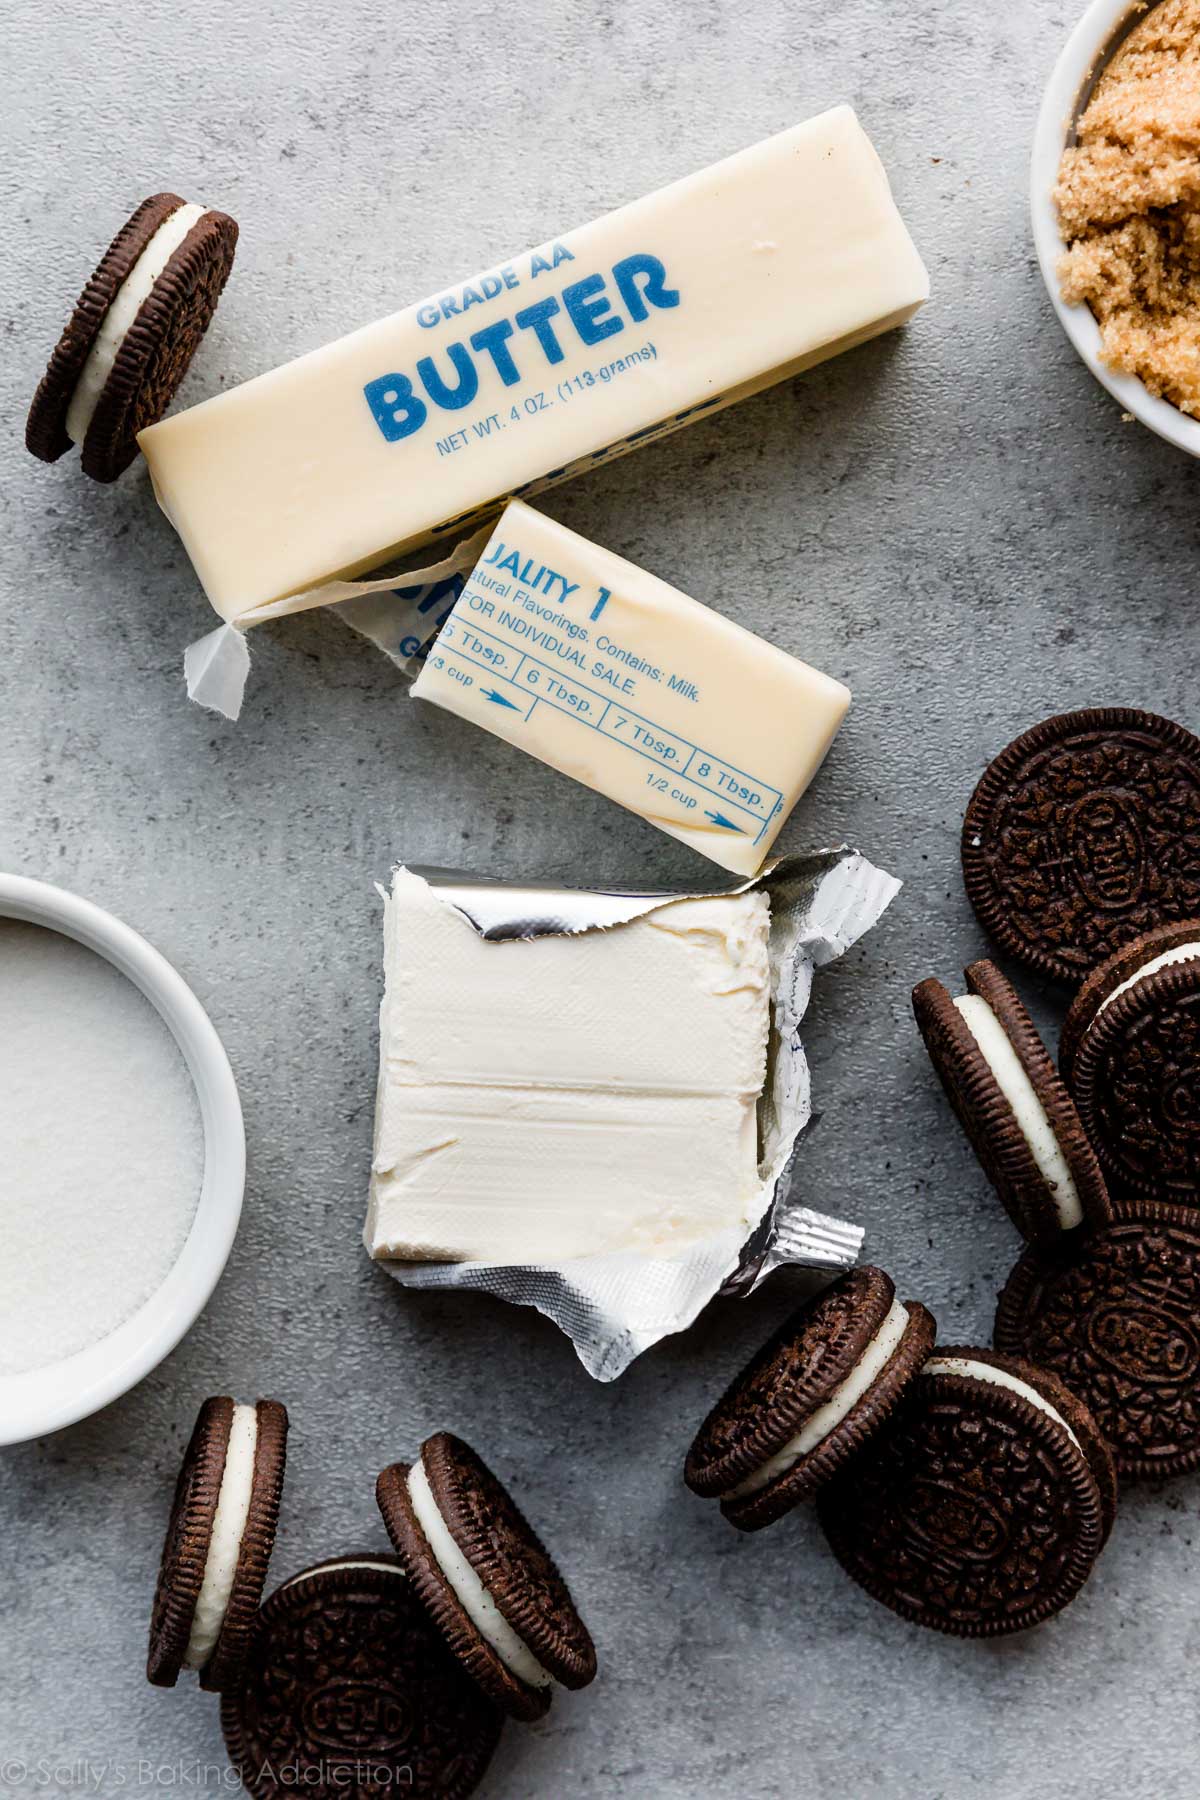 butter, cream cheese and Oreo cookies